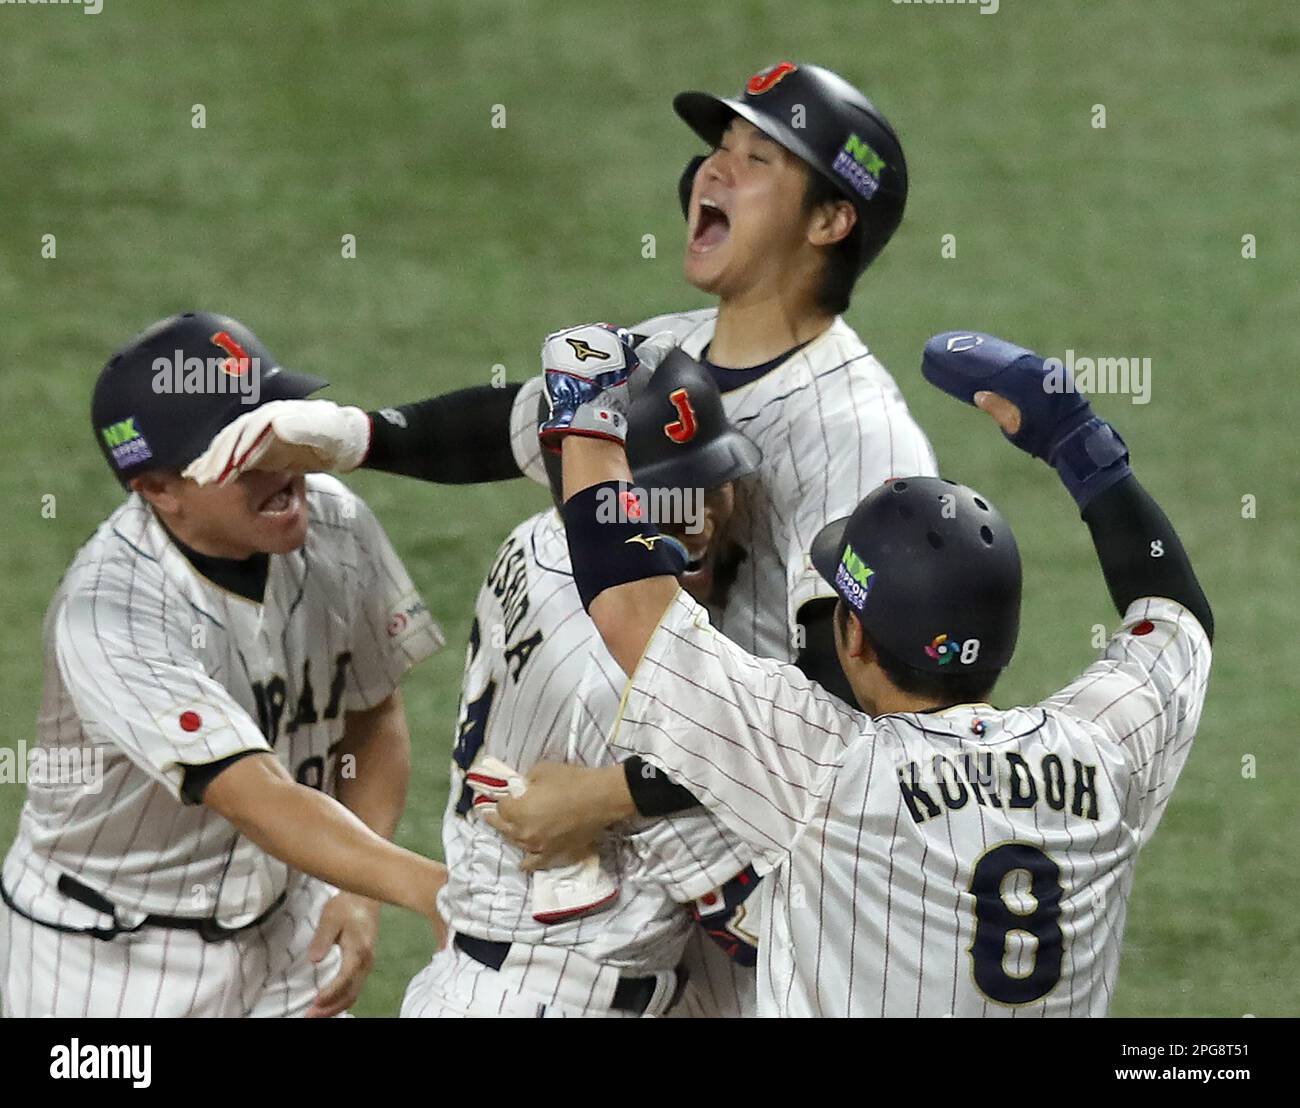 Miami, United States. 20th Mar, 2023. Japan's Masataka Yoshinda (34) celebrates with teammates after hitting a three run home run in the seventh inning of the 2023 World Baseball Classic semifinal game against Mexico in Miami, Florida on Monday, March 20, 2023. Photo by Aaron Josefczyk/UPI Credit: UPI/Alamy Live News Stock Photo